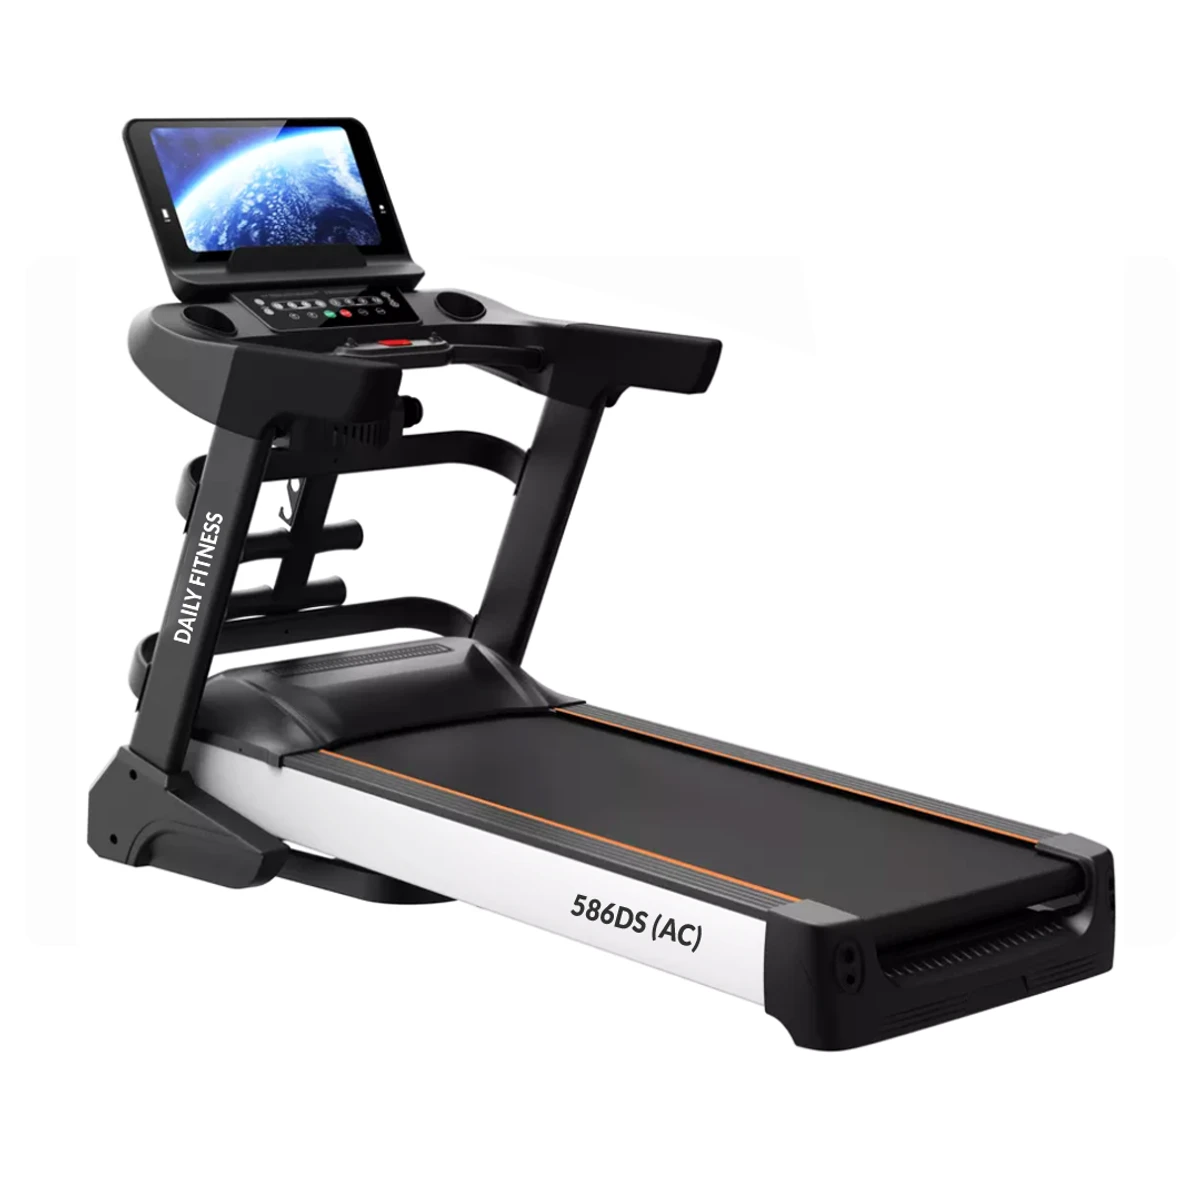 Daily fitness 586DS AC Motor: 4.5 HP Peak Semi Commercial Android Intelligent Foldable Motorized Treadmill